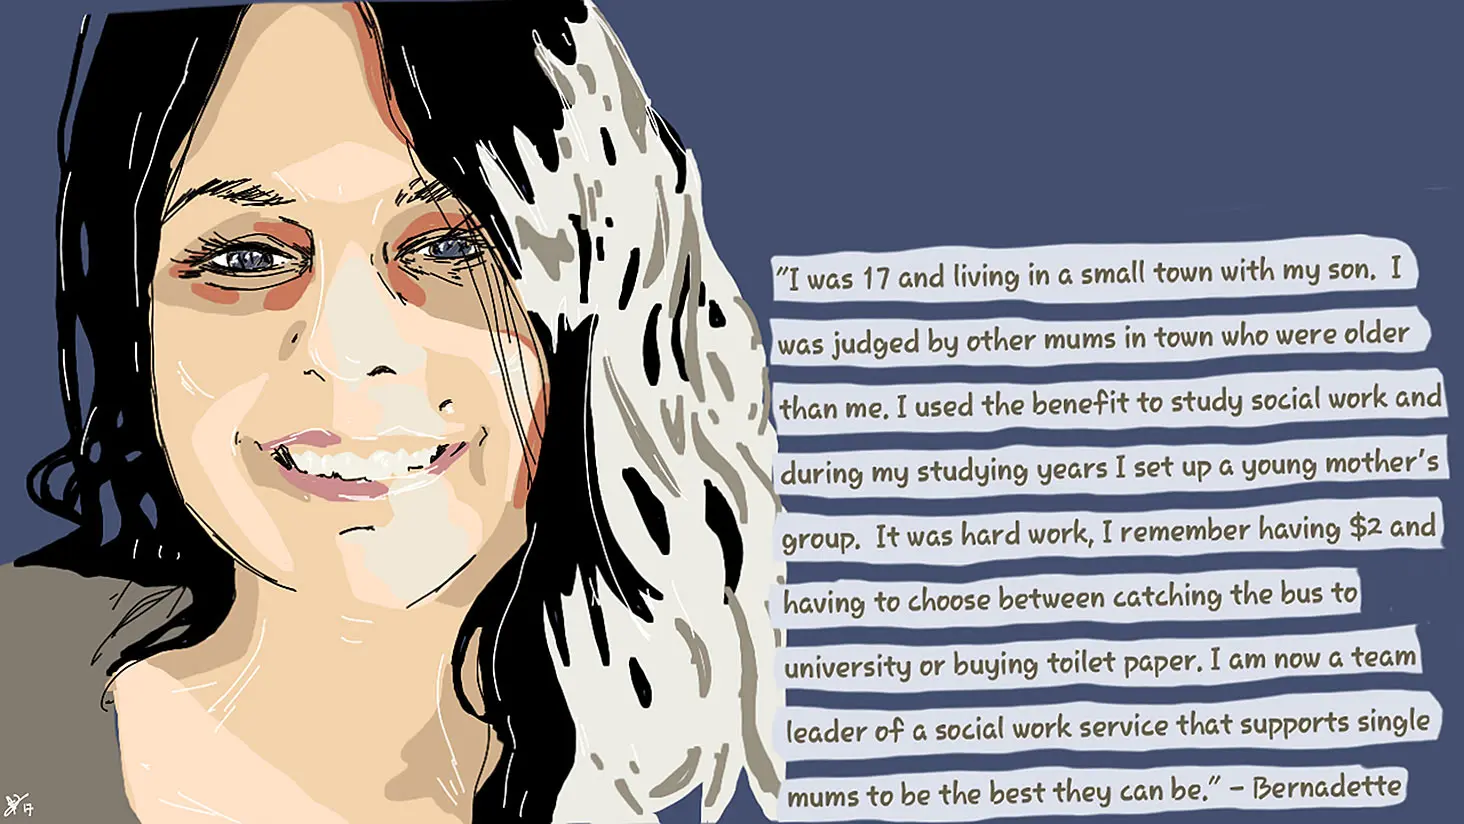 Artwork showing a mum's face smiling collaged with her story of being a beneficiary while raising a child as a single parent. For words in artwork, refer 'Words in the digital artworks' below.